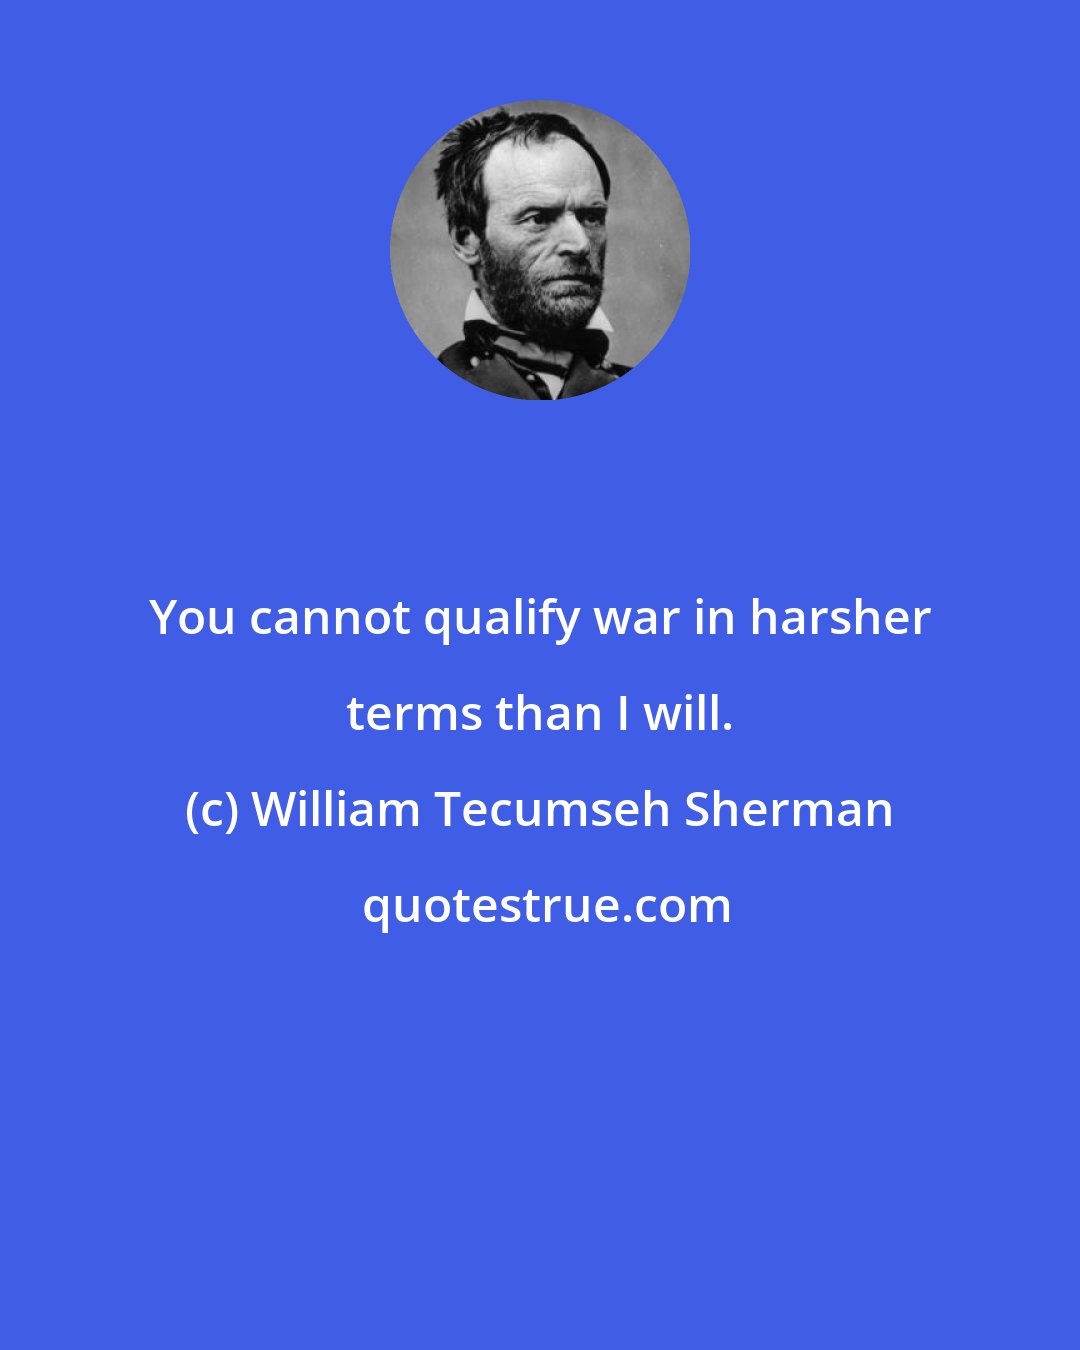 William Tecumseh Sherman: You cannot qualify war in harsher terms than I will.